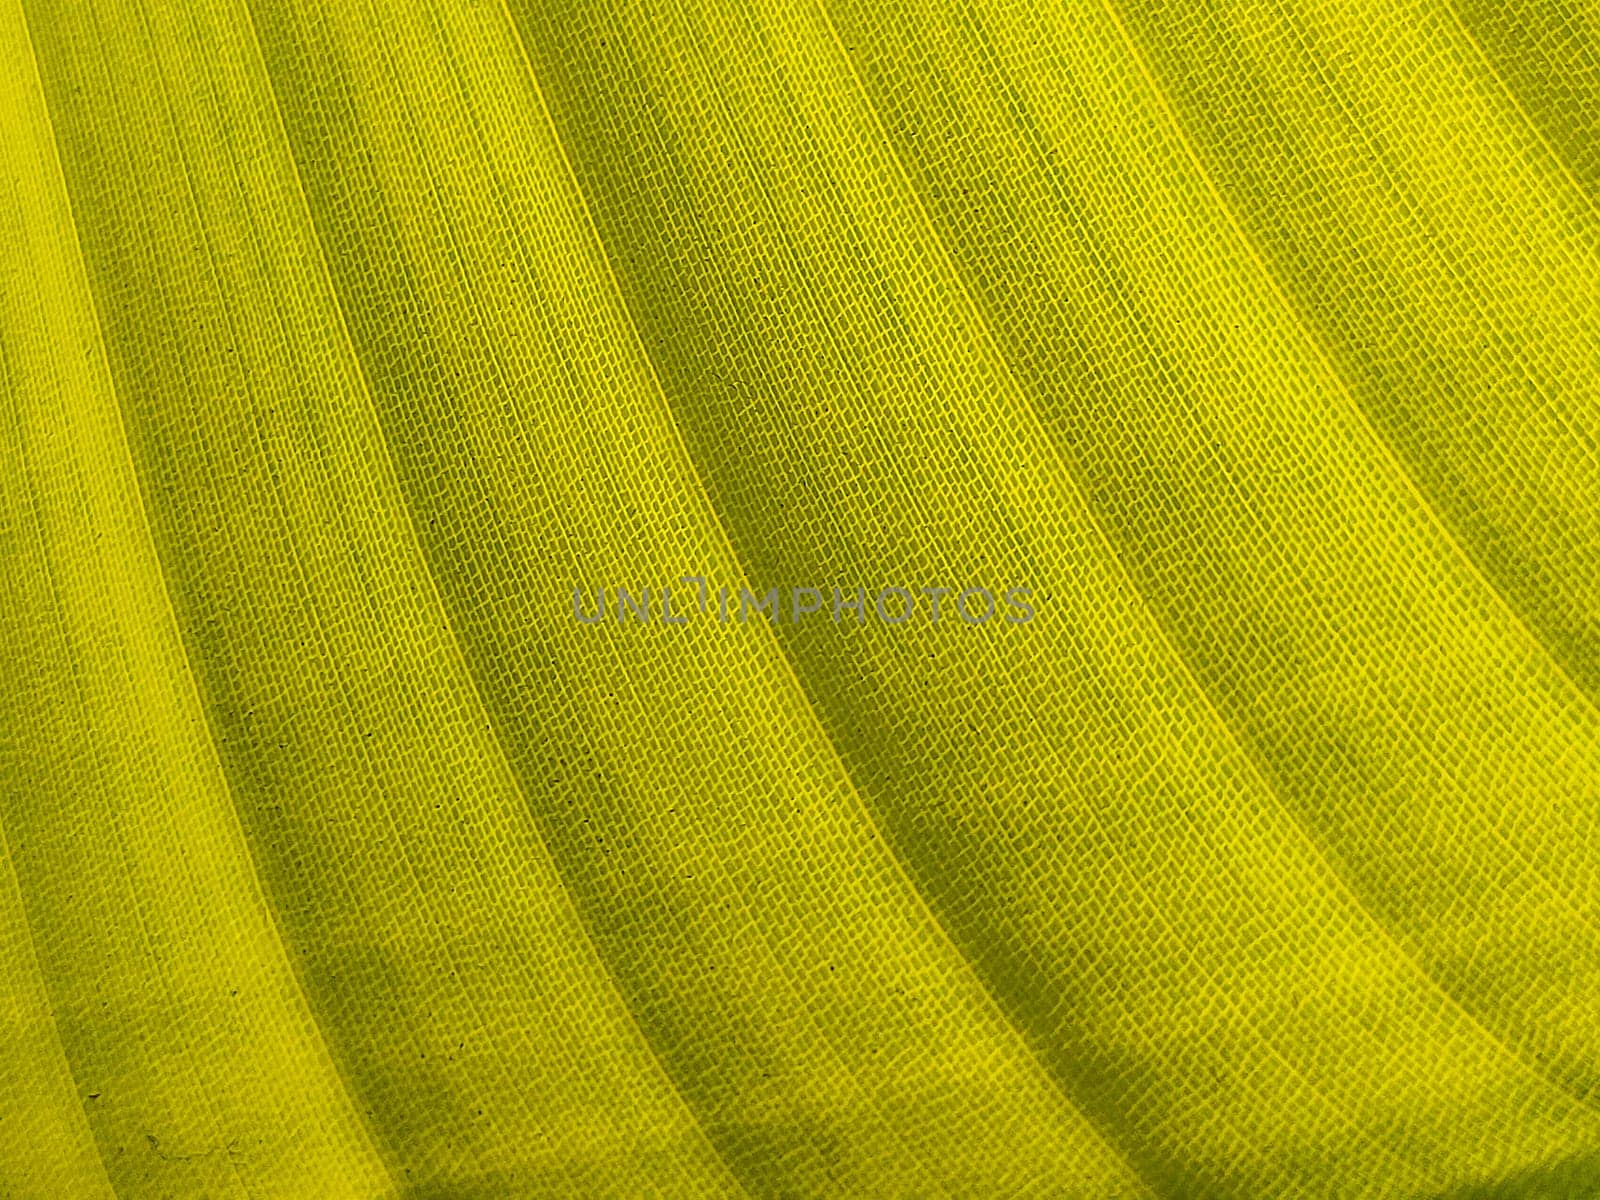 Texture of exotic green banana leave, asymmetric lines. by Laguna781